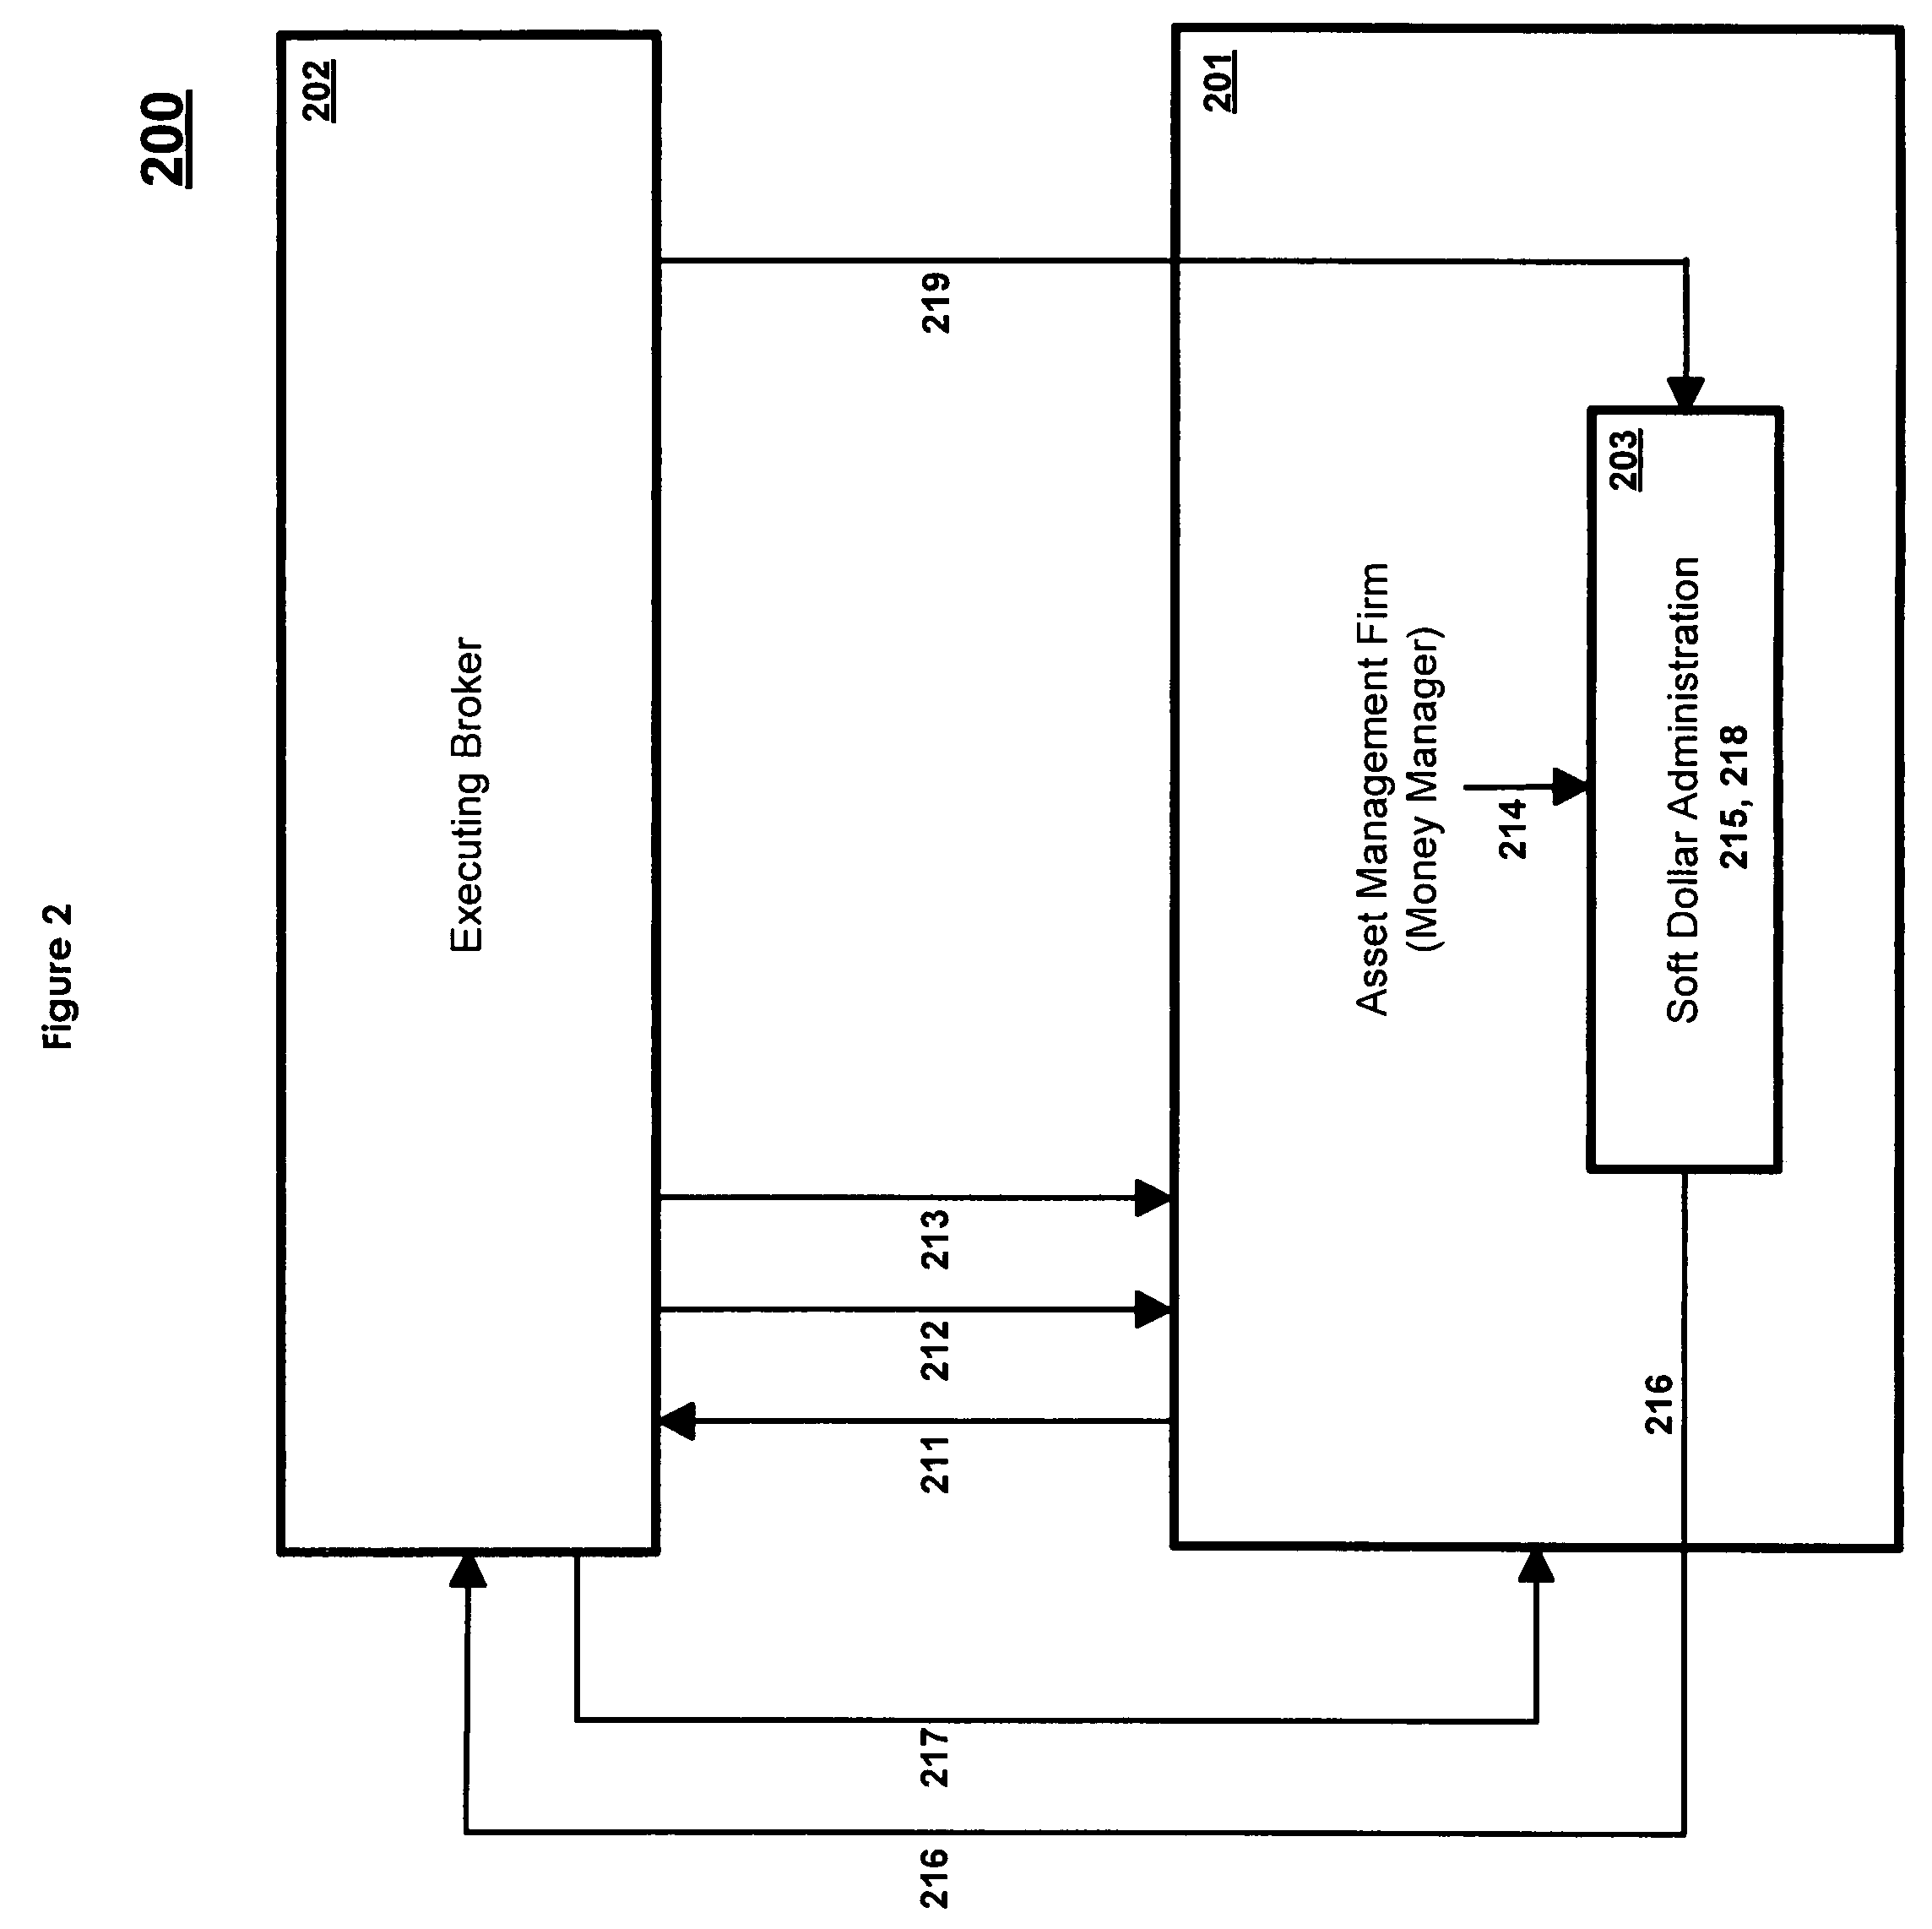 System and method for facilitating unified trading and control for a sponsoring organization's money management process